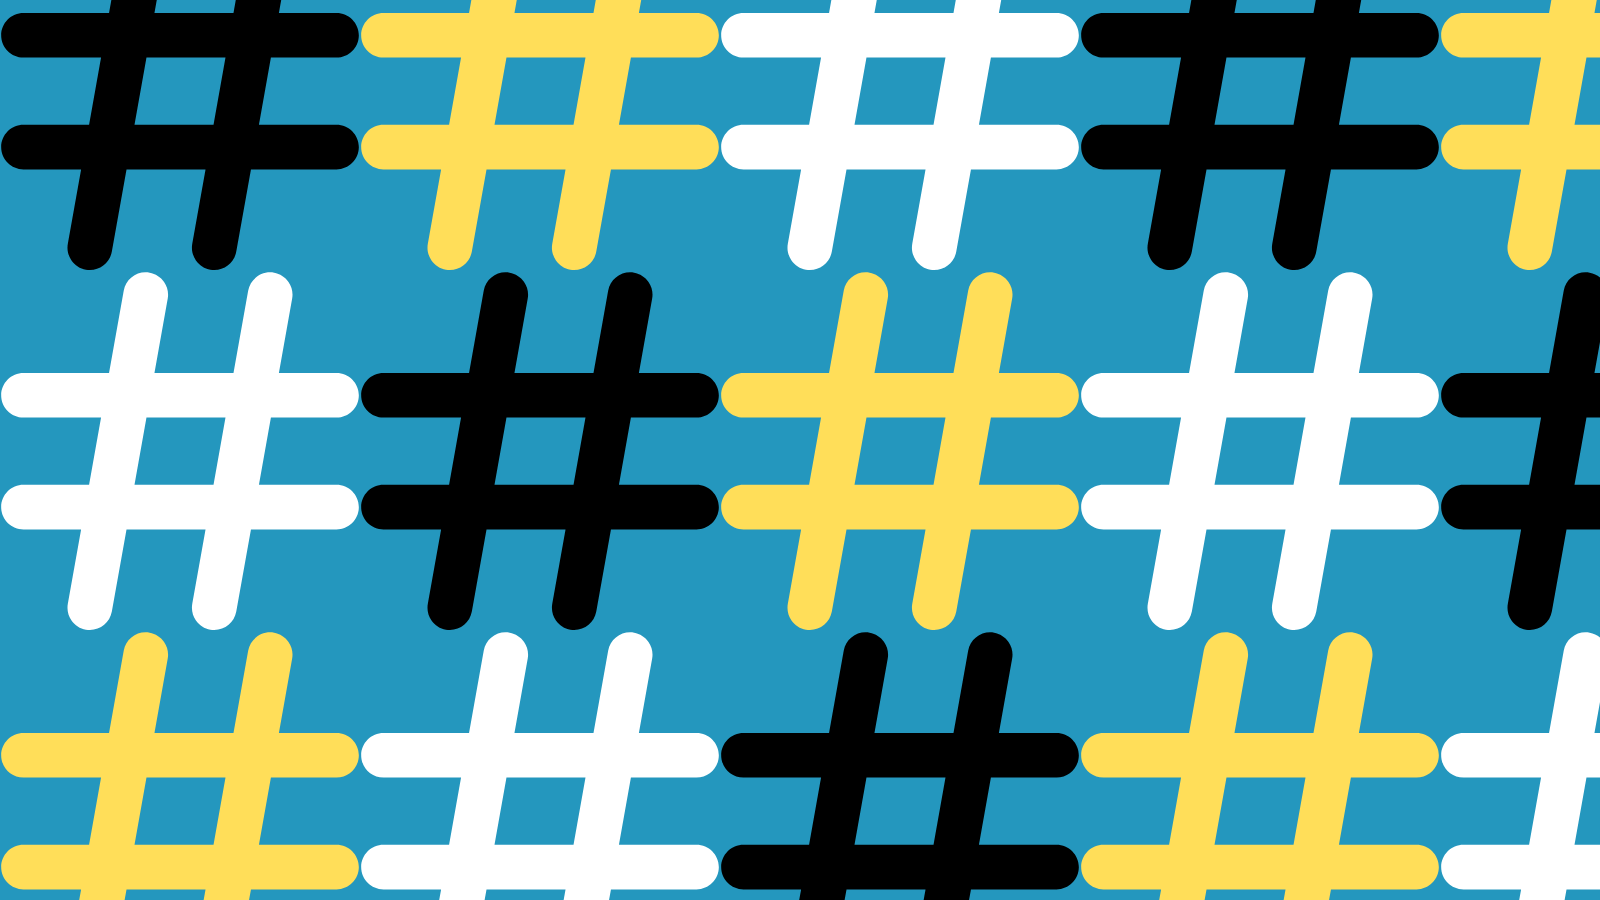 Hashtags in different colors